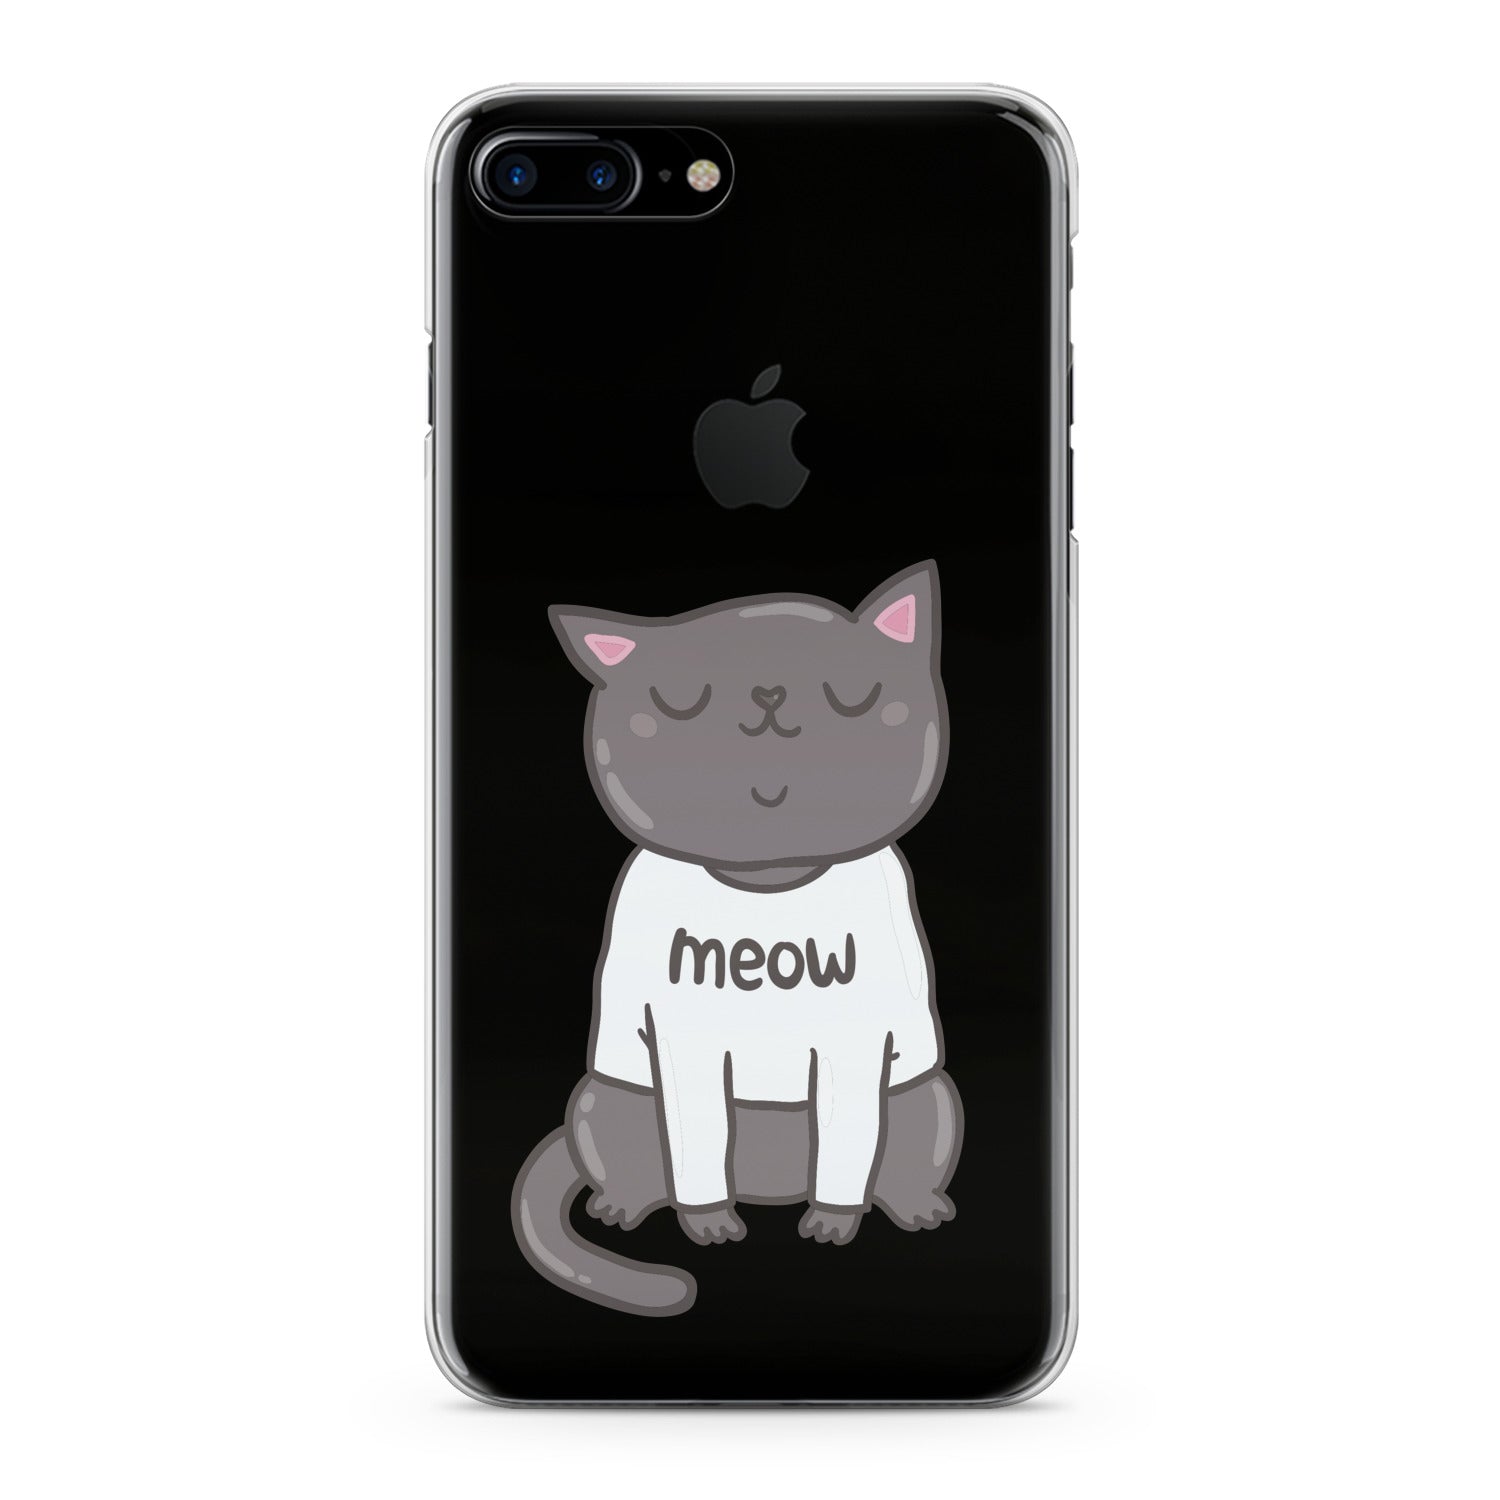 Lex Altern Meow Kawaii Cat Phone Case for your iPhone & Android phone.